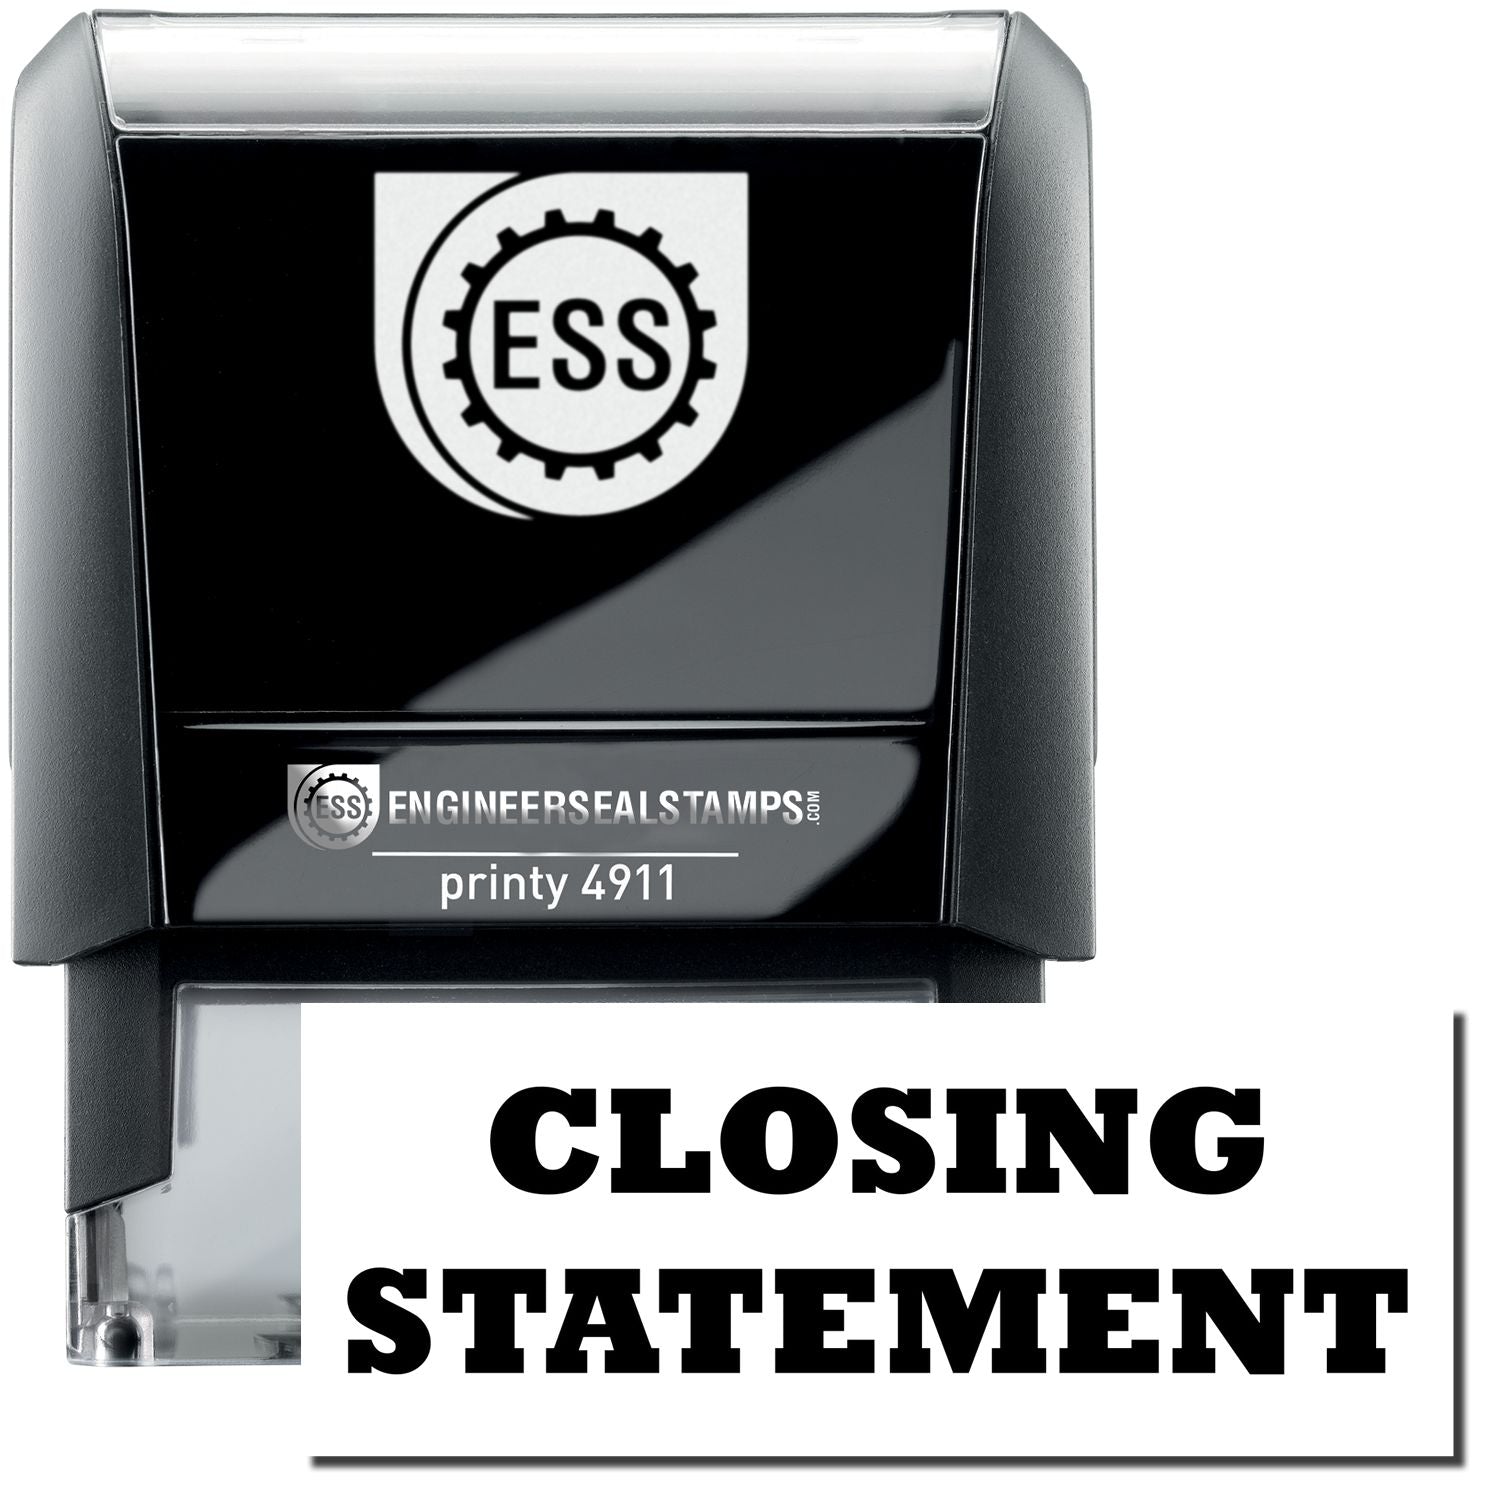 A self-inking stamp with a stamped image showing how the text "CLOSING STATEMENT" is displayed after stamping.